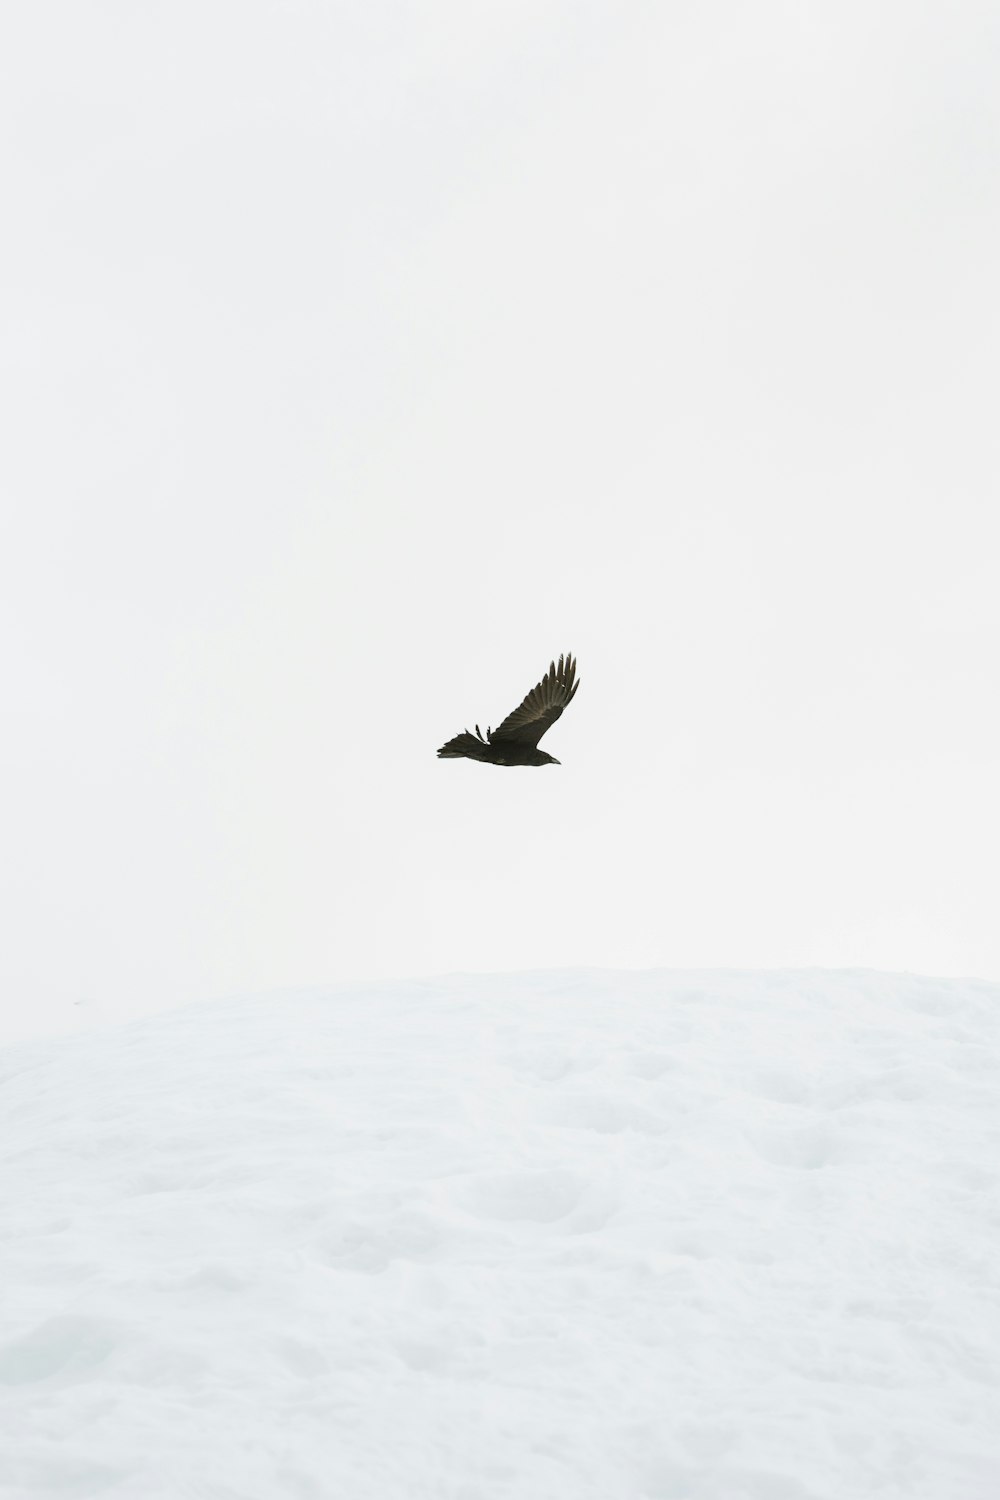 a bird flying over a snow covered hill